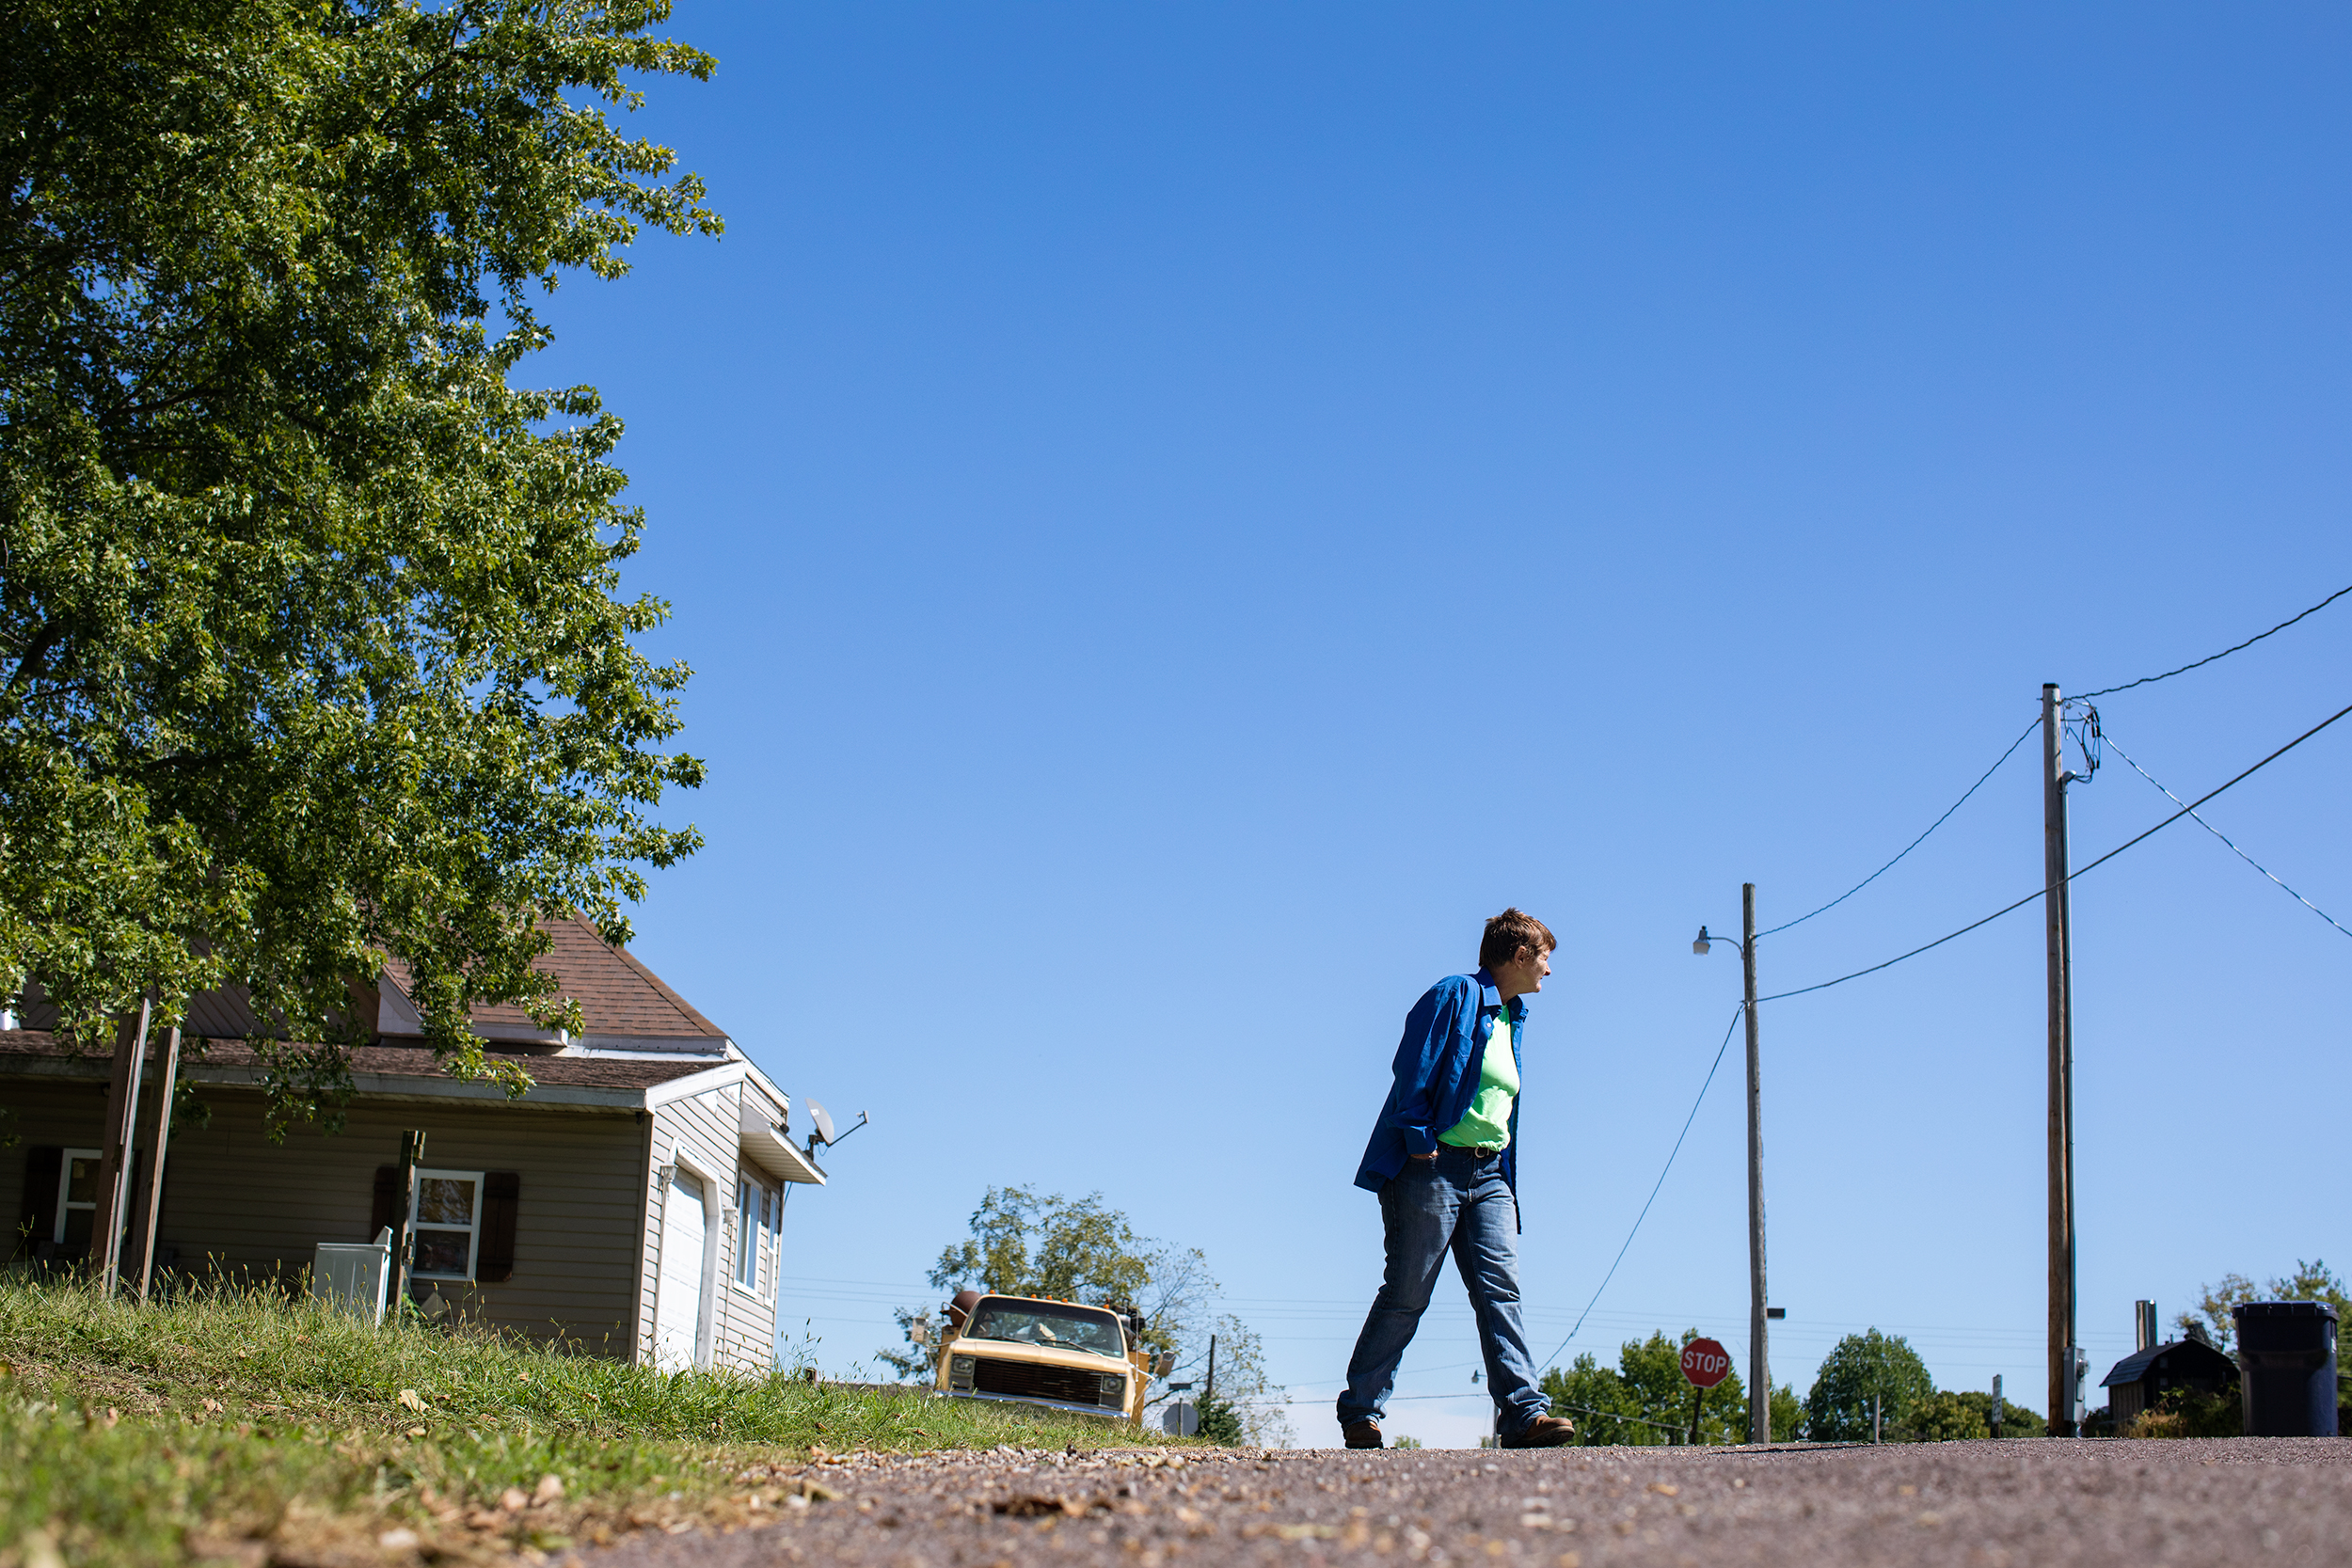  Brenda walks around her neighborhood in Mountain Grove, Mo. Although her difficult past and financial challenges keep her on the edge, she’s determined to keep on going, looking for ways to survive. 